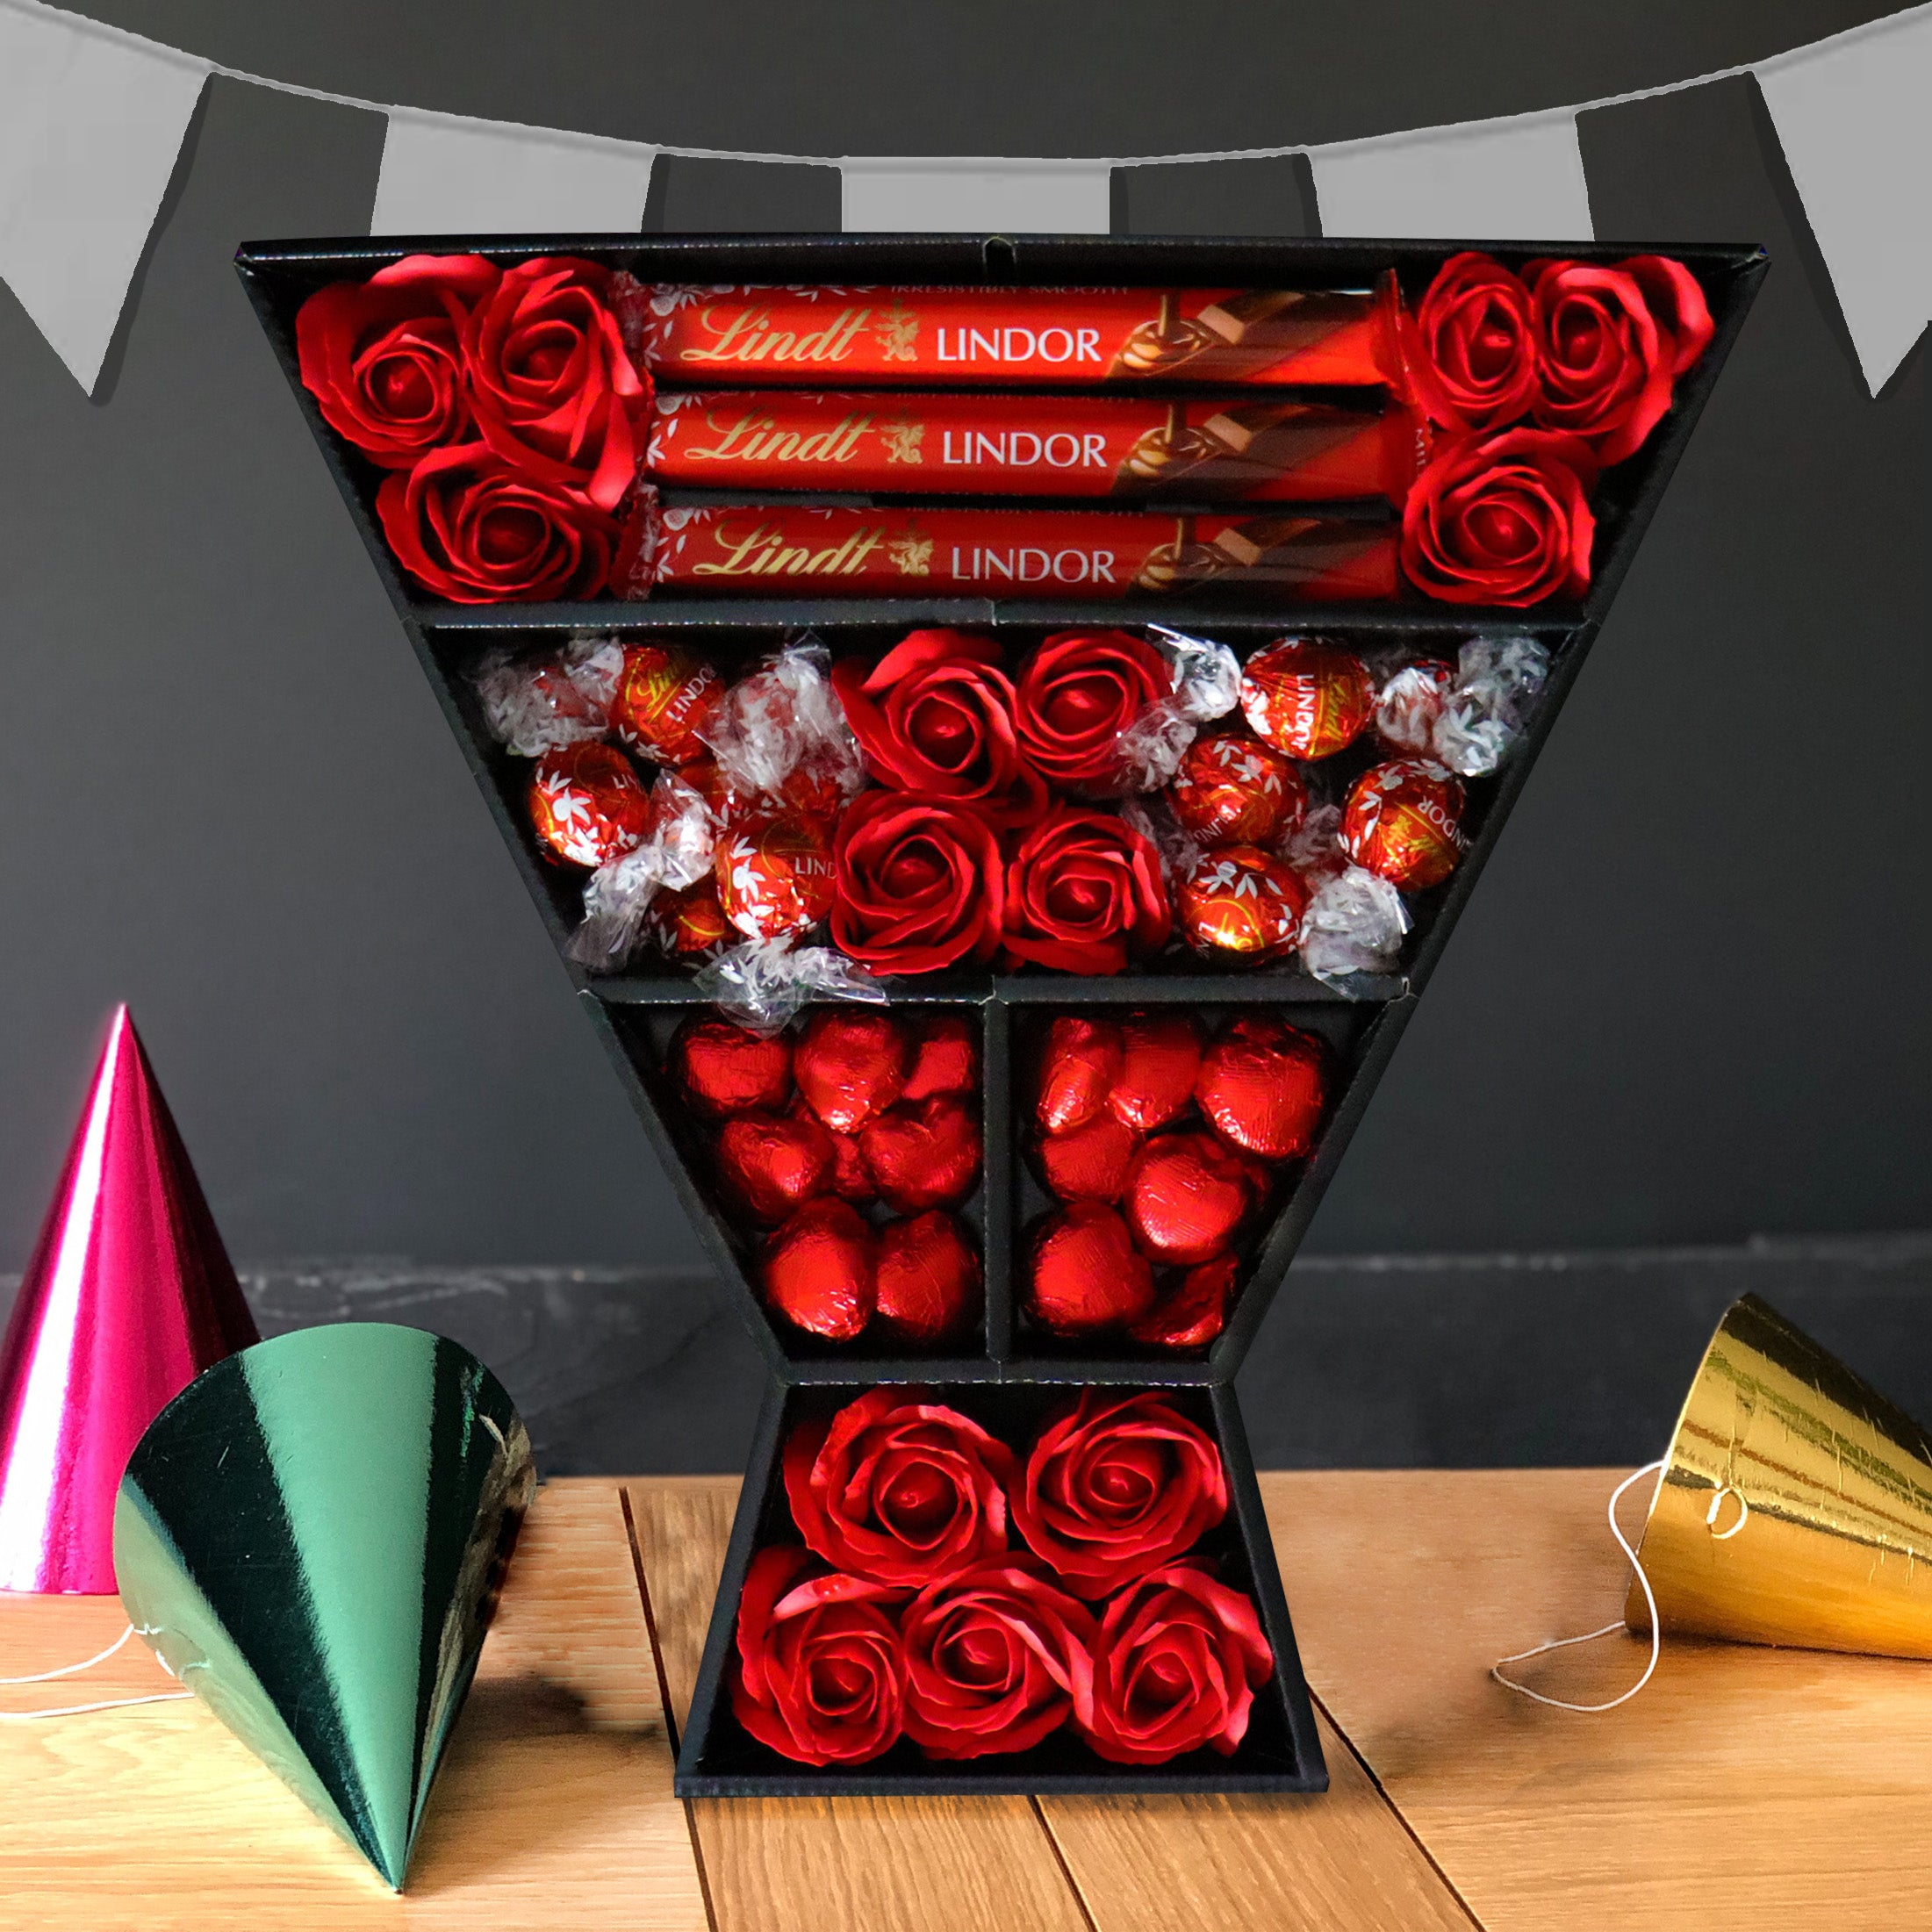 Lindt Lindor Happy Birthday Signature Chocolate Bouquet with Red Roses - Perfect Birthday Gift